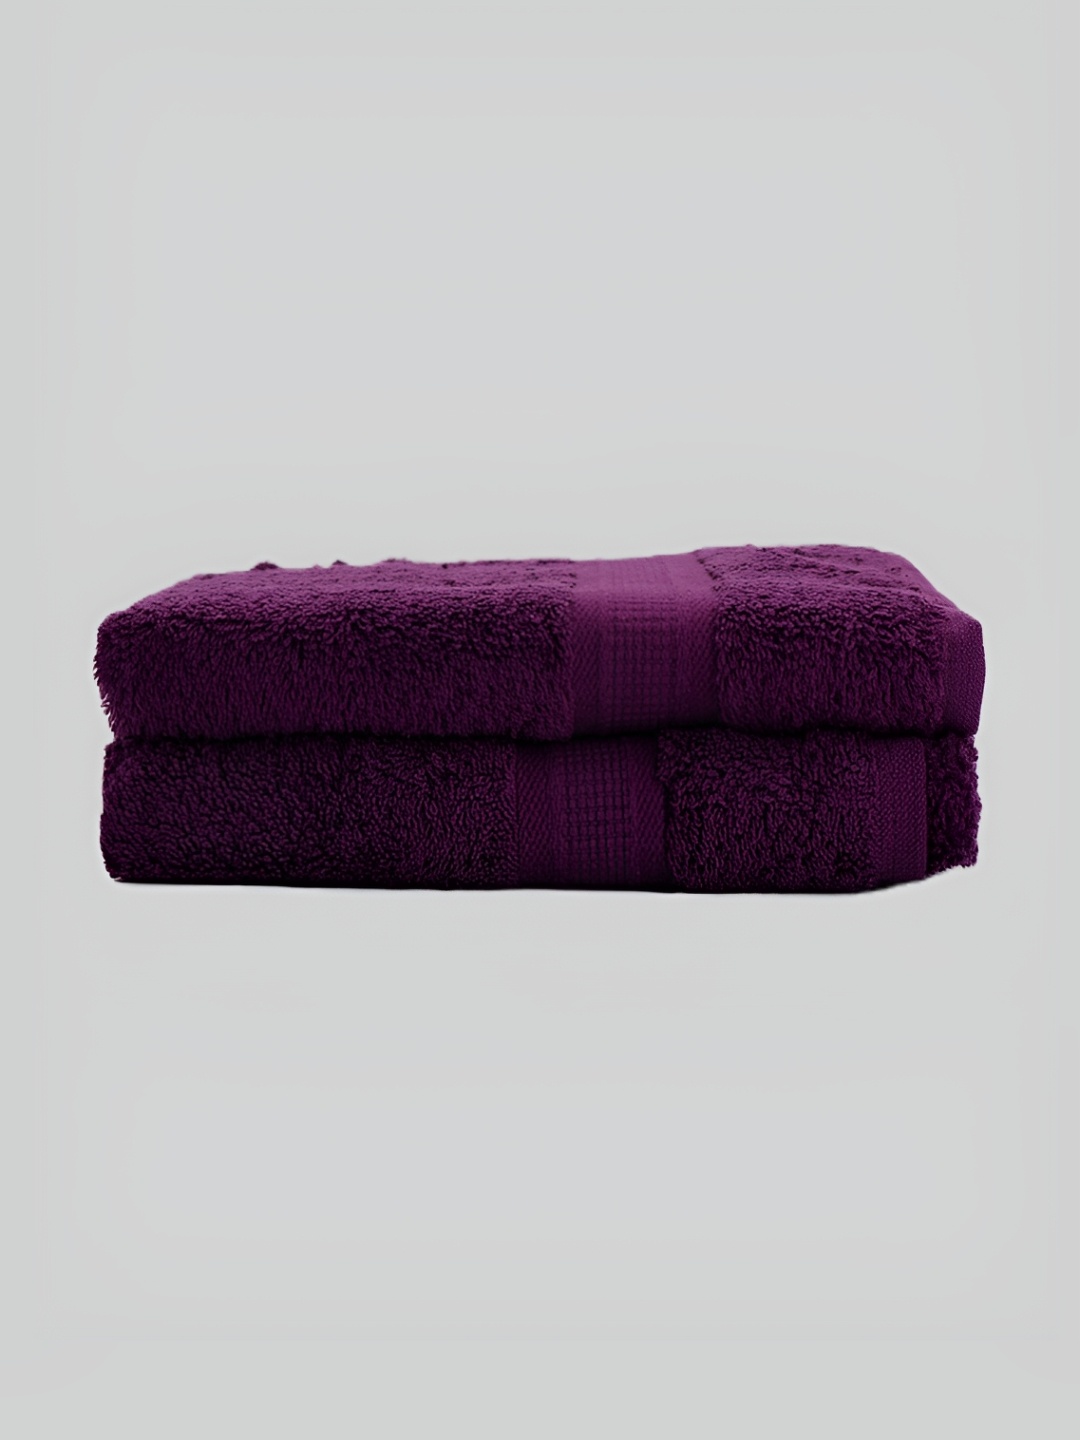 

BOMBAY DYEING Santino Magenta 2 Pieces 550 GSM Pure Cotton Hand Towels